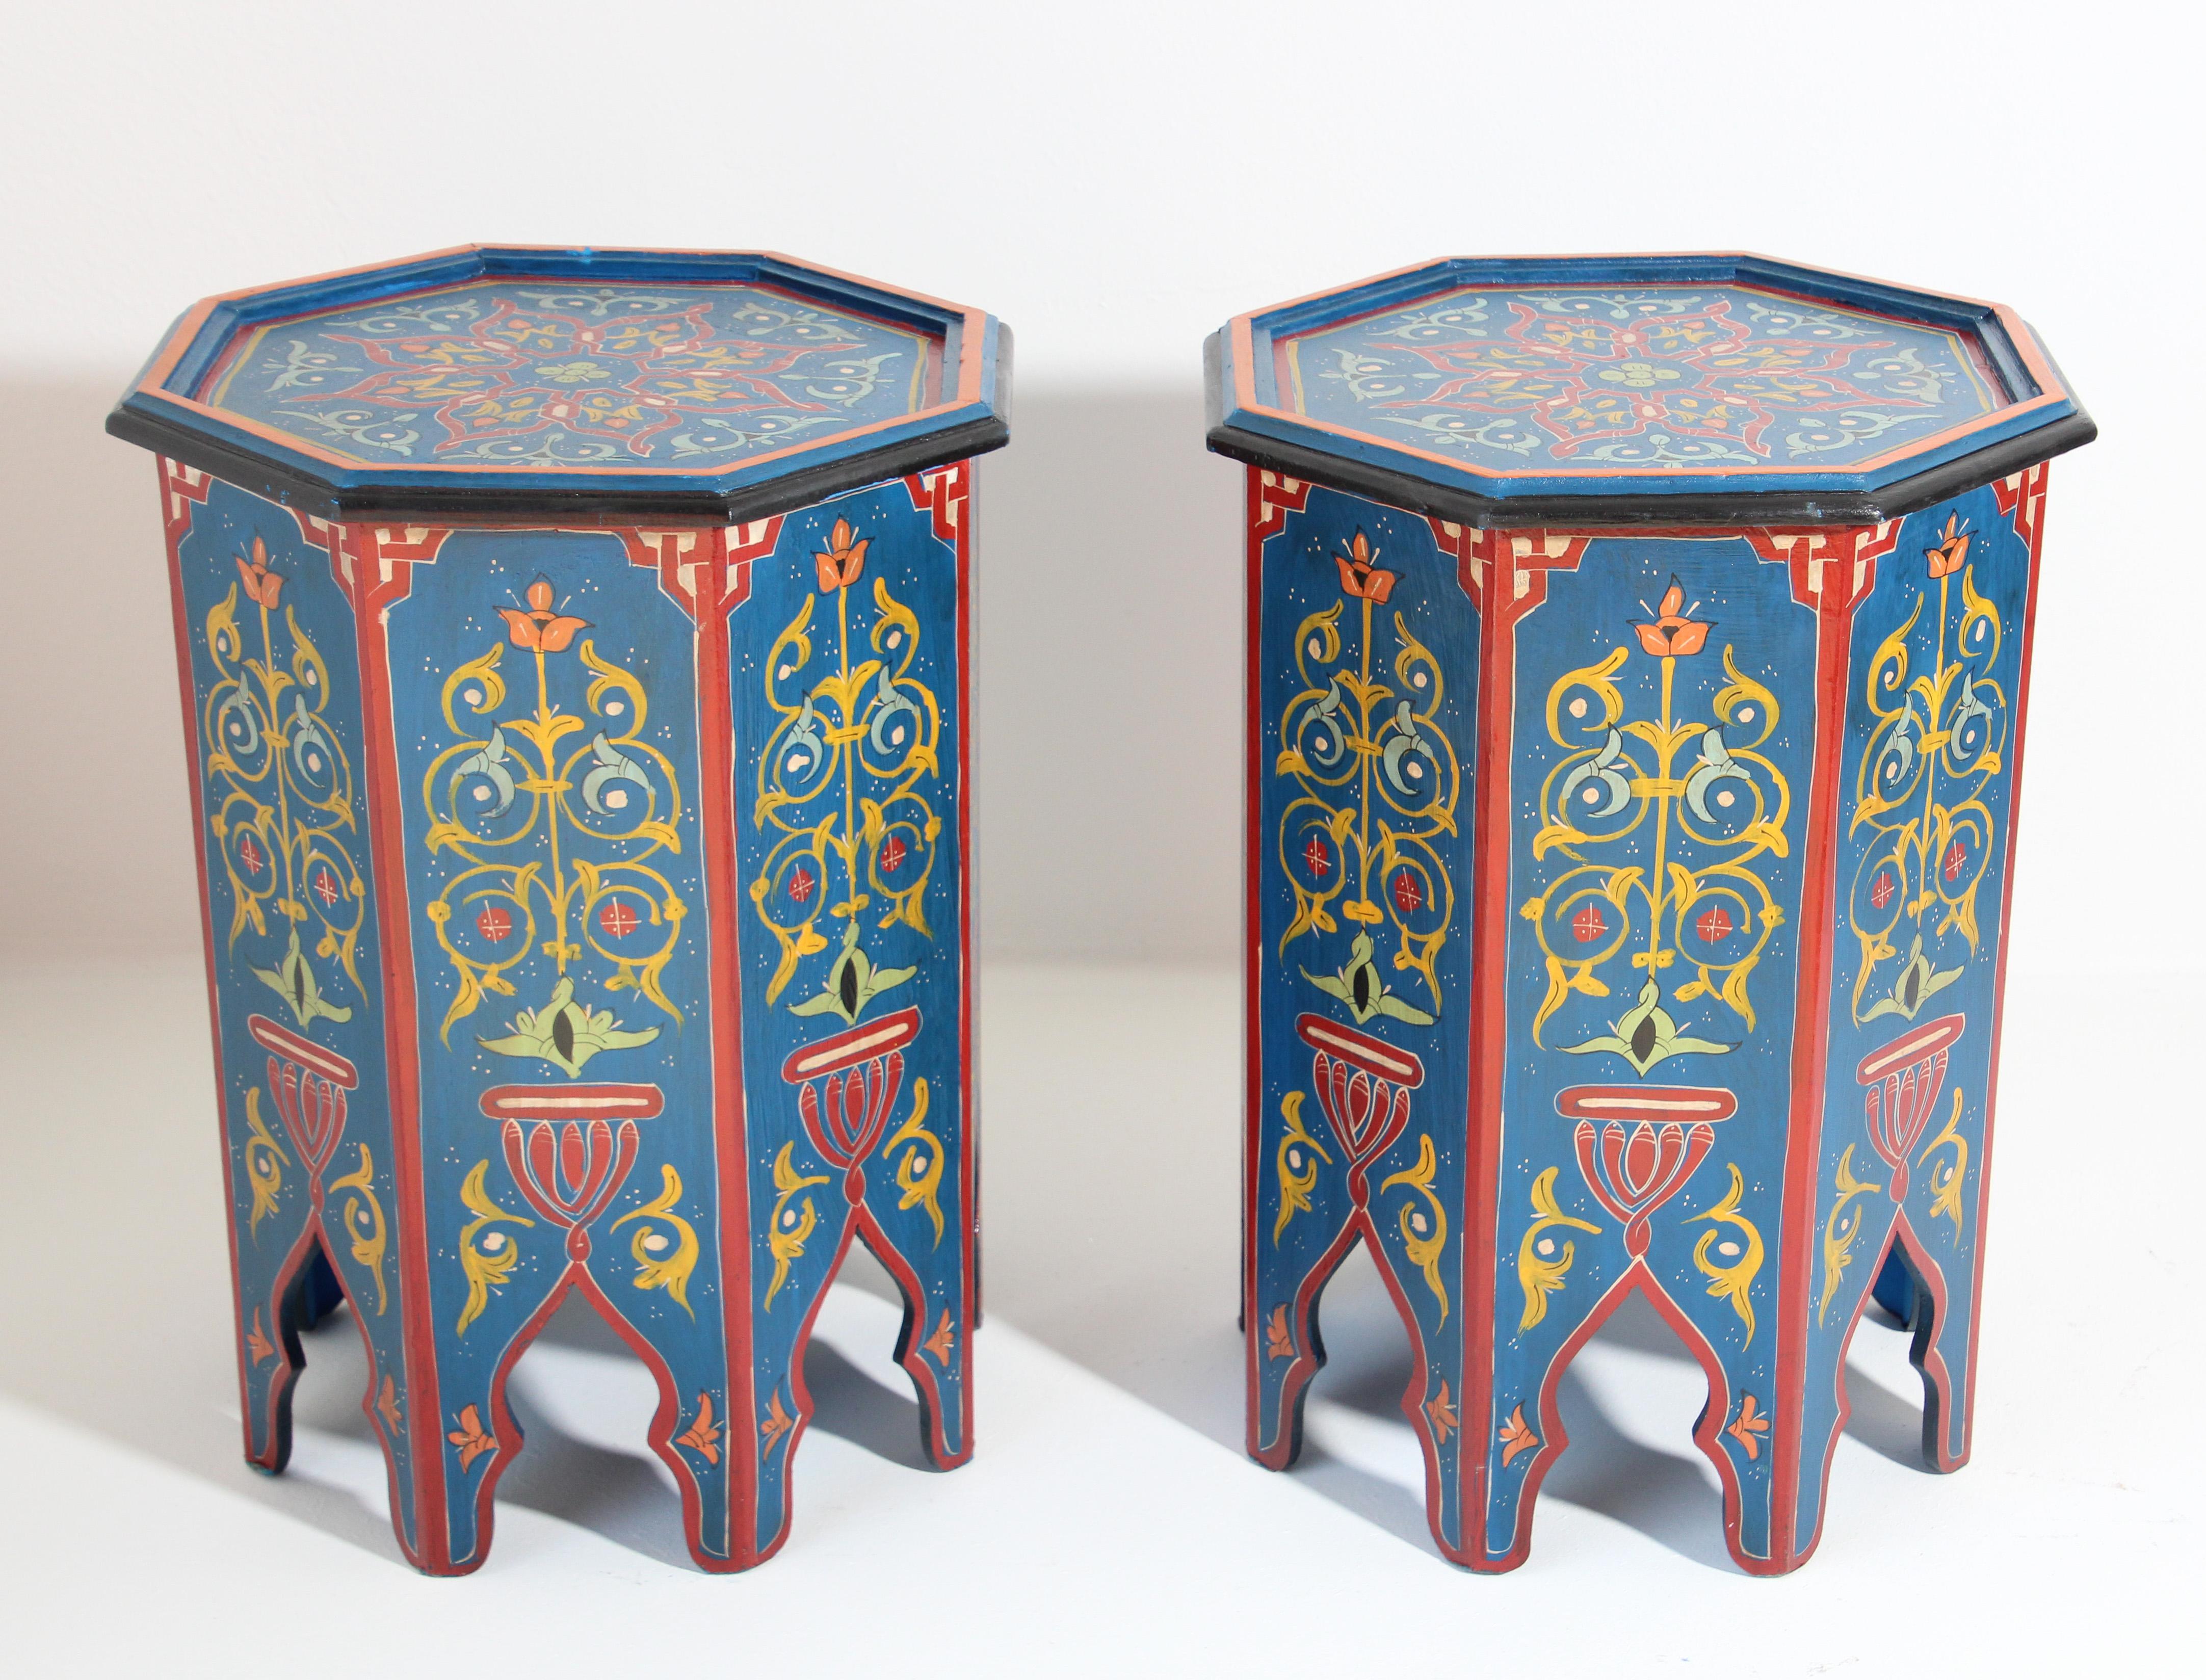 Pair of Moroccan handcrafted blue color hand painted tabourets or side tables.
Octagonal shape pedestal tables with Moorish arches.
Very decorative fine artwork in octagonal shape base.
You can use them as nightstand, stools, or side pedestal